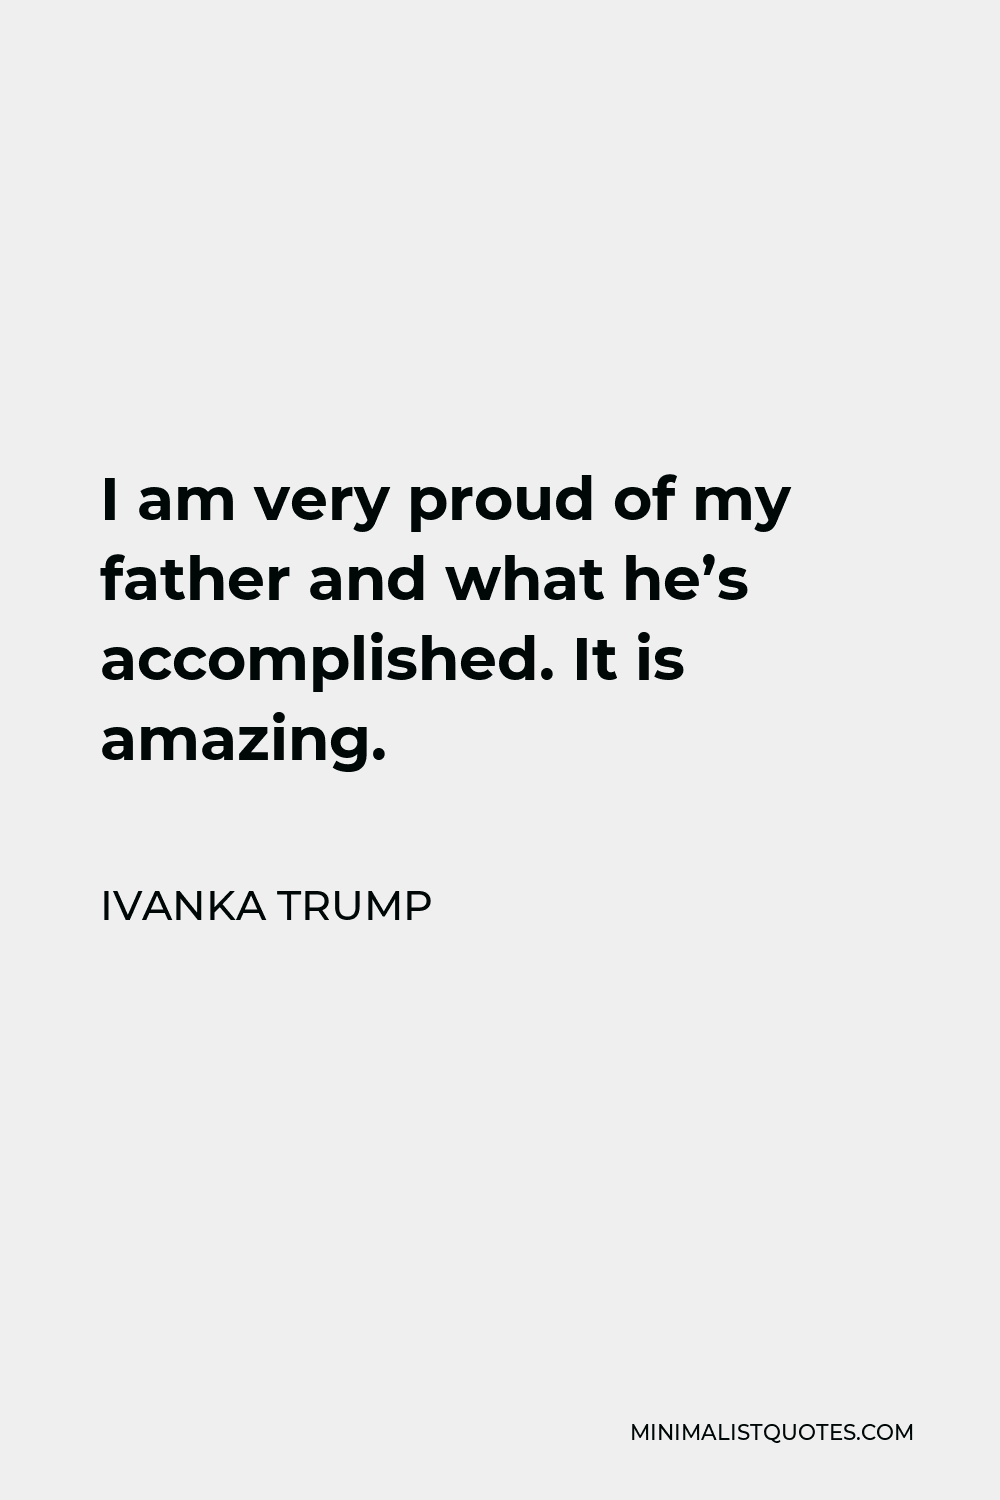 Ivanka Trump Quote - I am very proud of my father and what he’s accomplished. It is amazing.